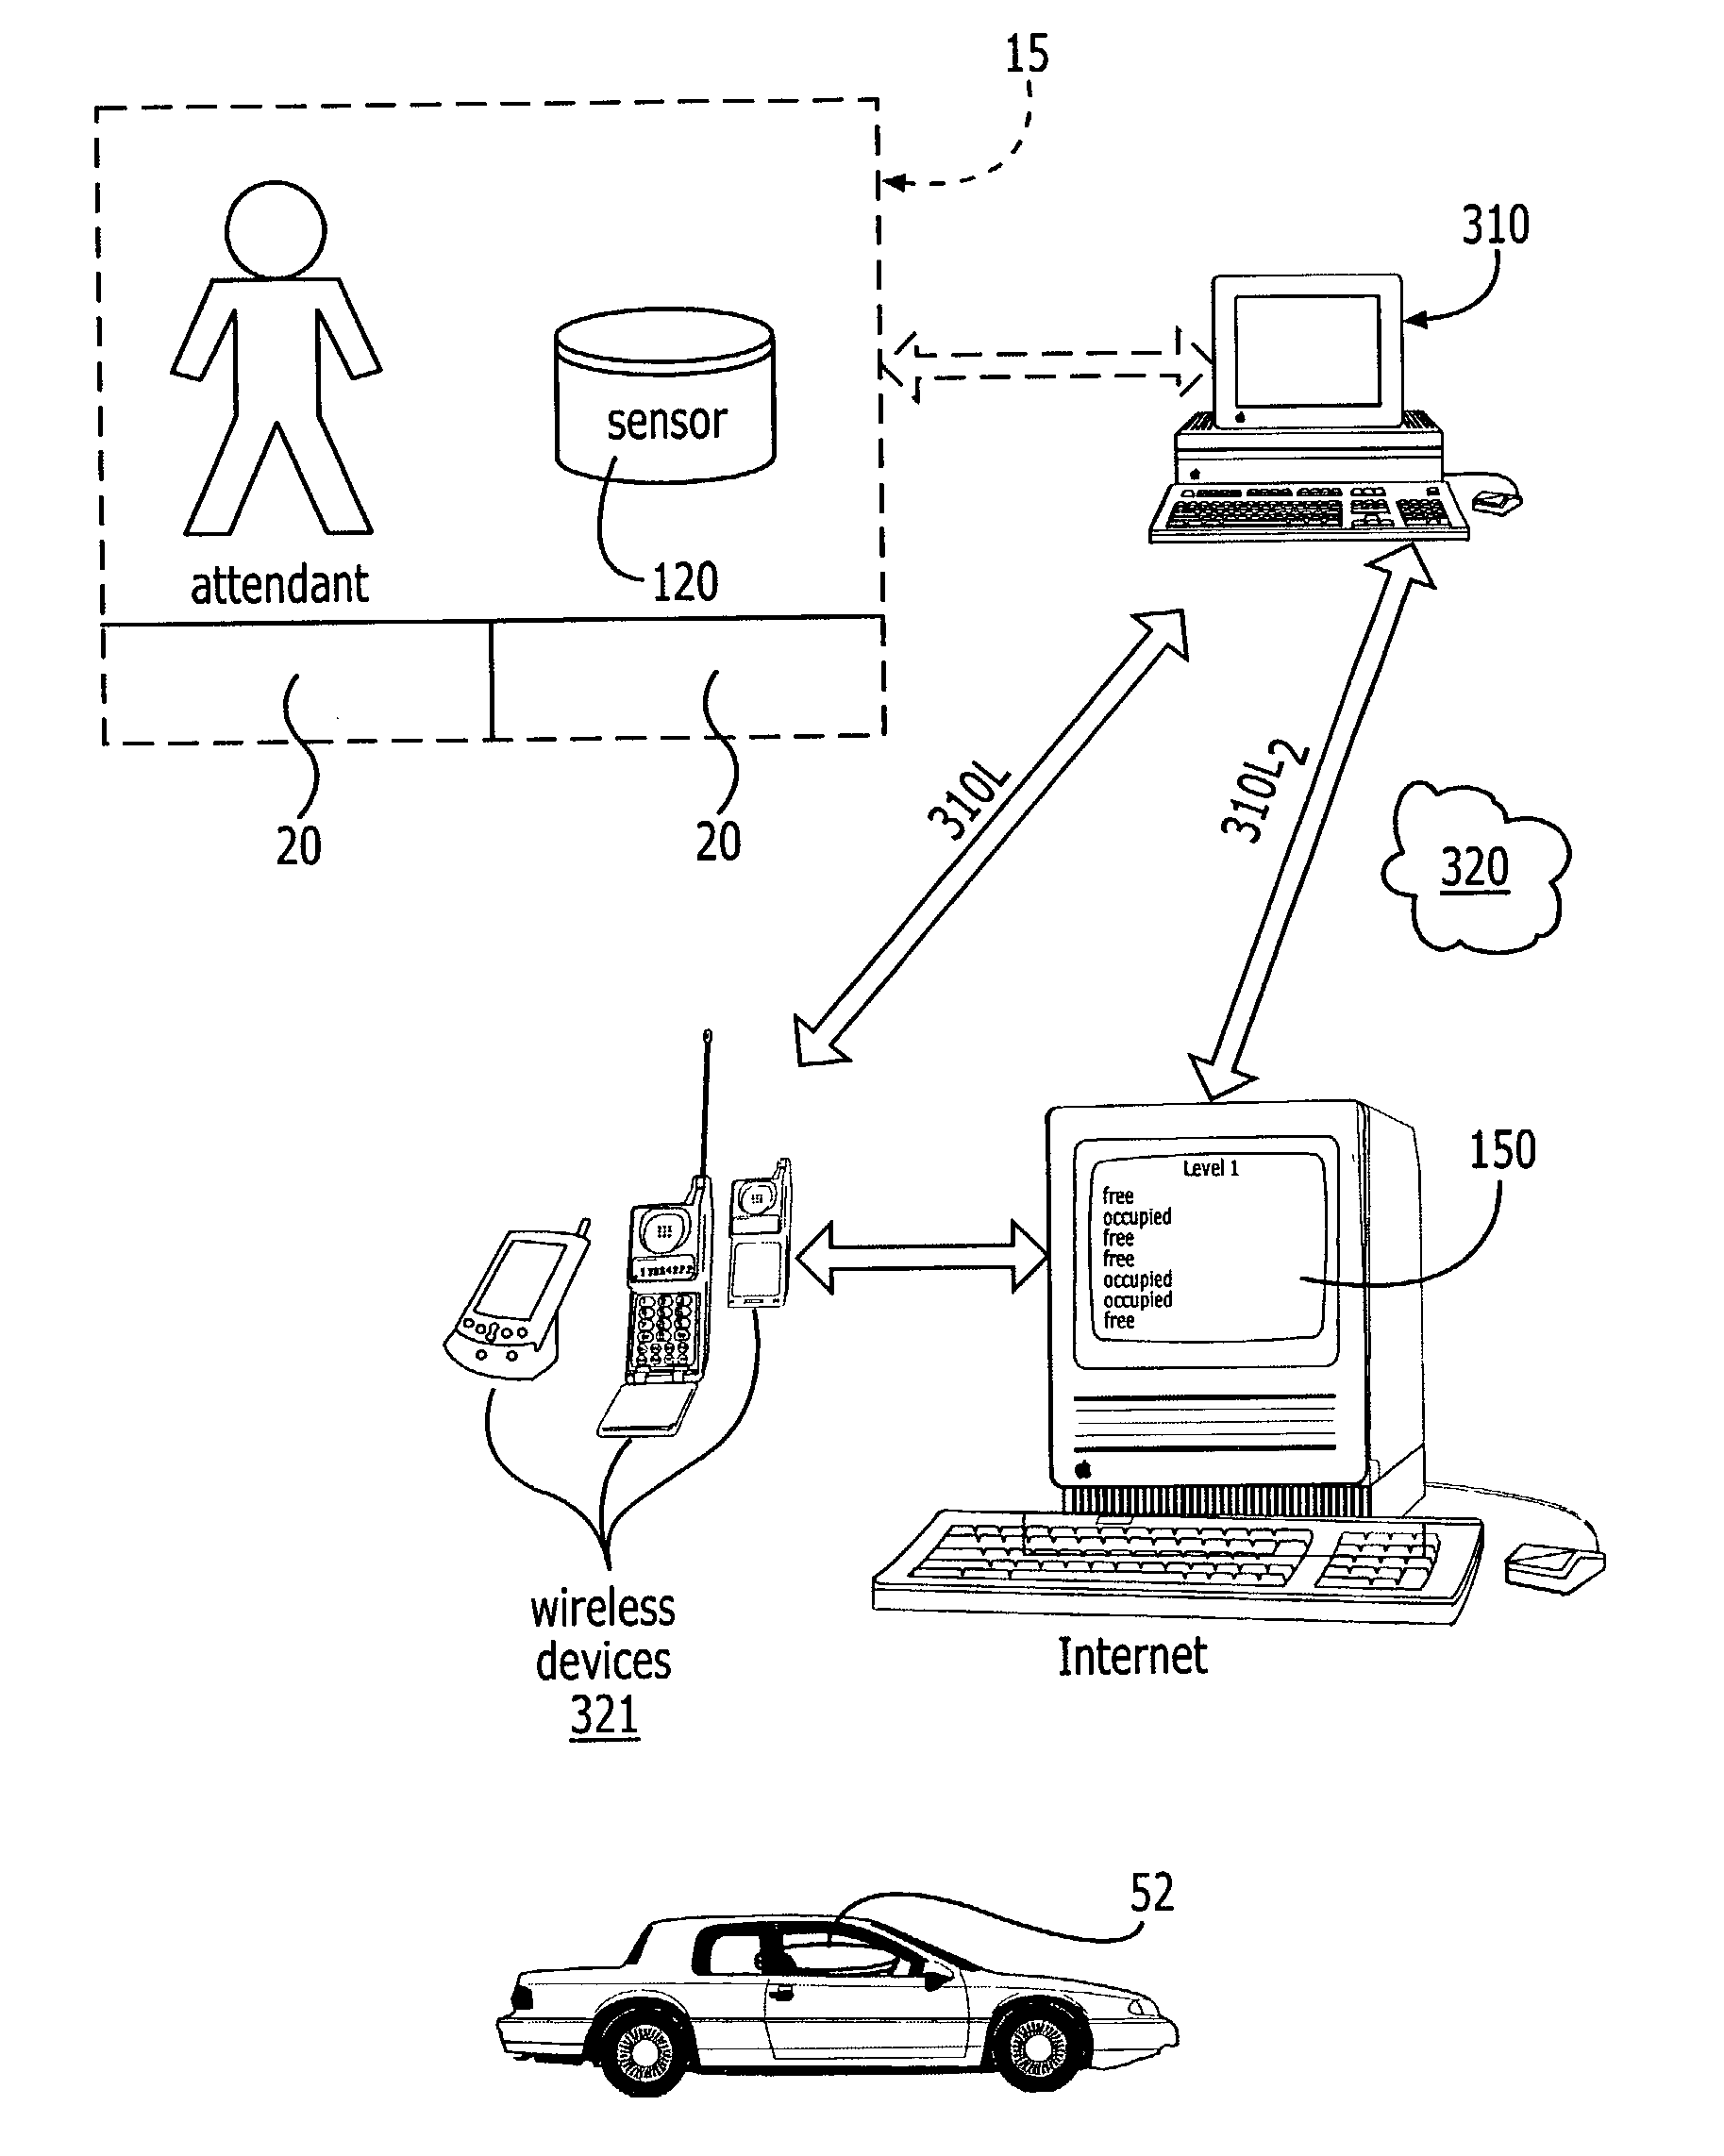 Parking reservation systems and related methods